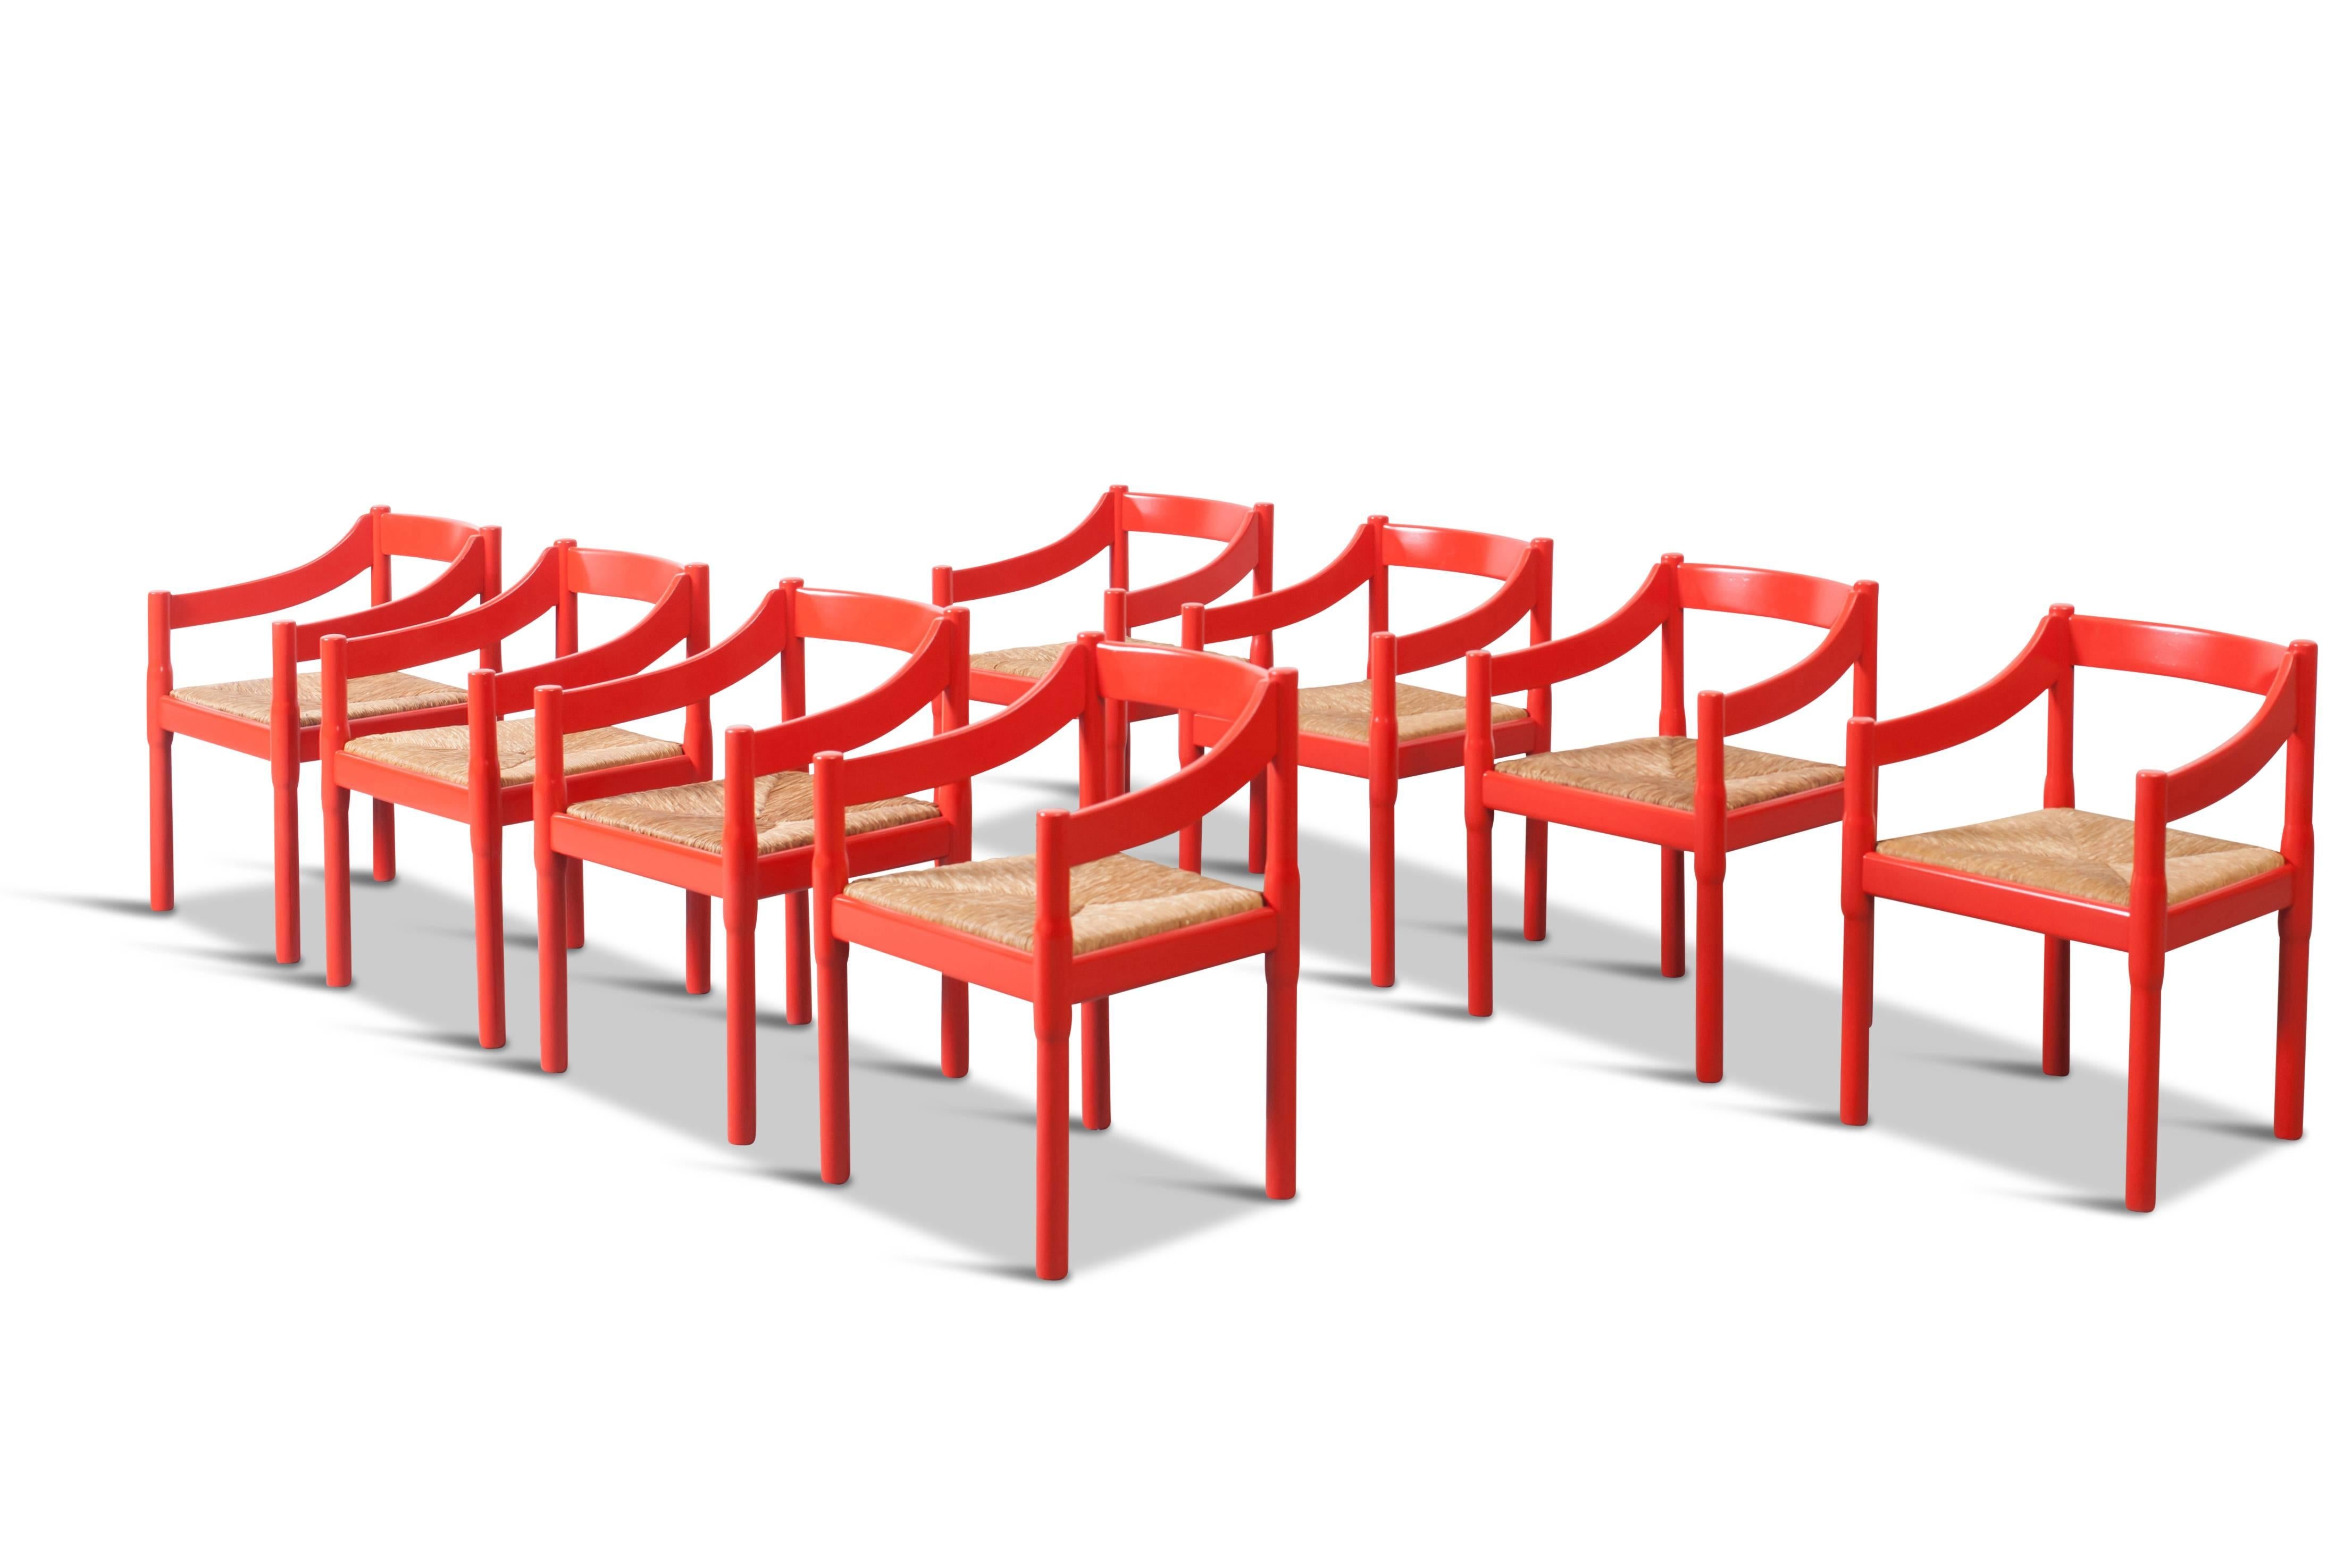 Set of eight 'Carimate' chairs, in beech and rope
by Vico Magistretti for Cassina

A true iconic design with a simple and elegant shape 
the gently curved arms and woven seats provide great comfort

Red lacquered beech wooden frames and natural